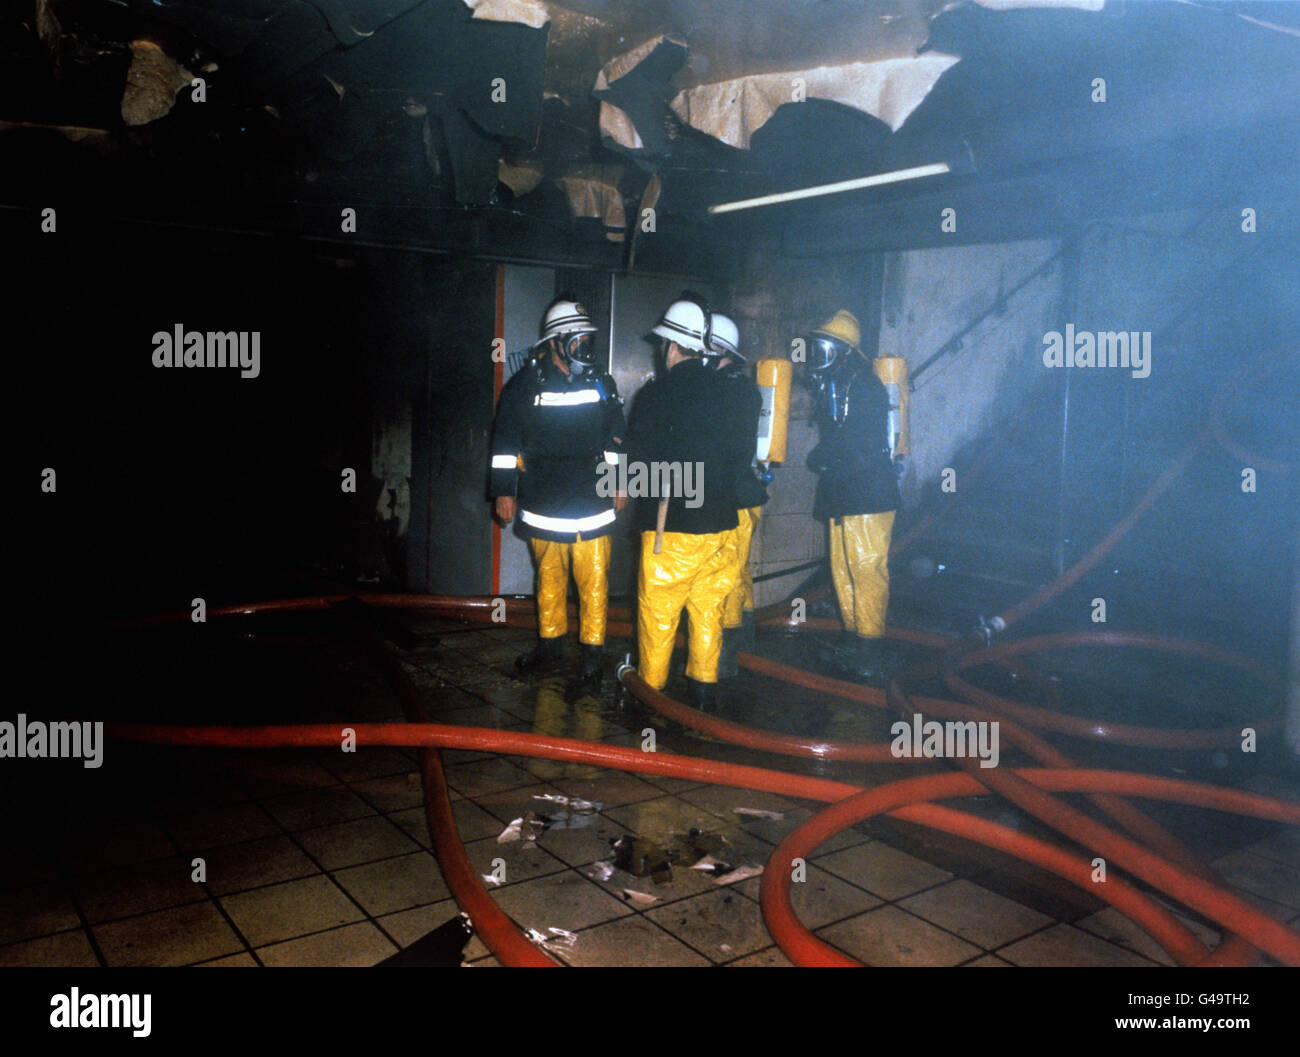 At least 31 people died and scores were injured in a major fire at London's busiest underground station at Kings Cross. Fireman are scene here in the smouldering remains of the main ticket hall in the station. Stock Photo